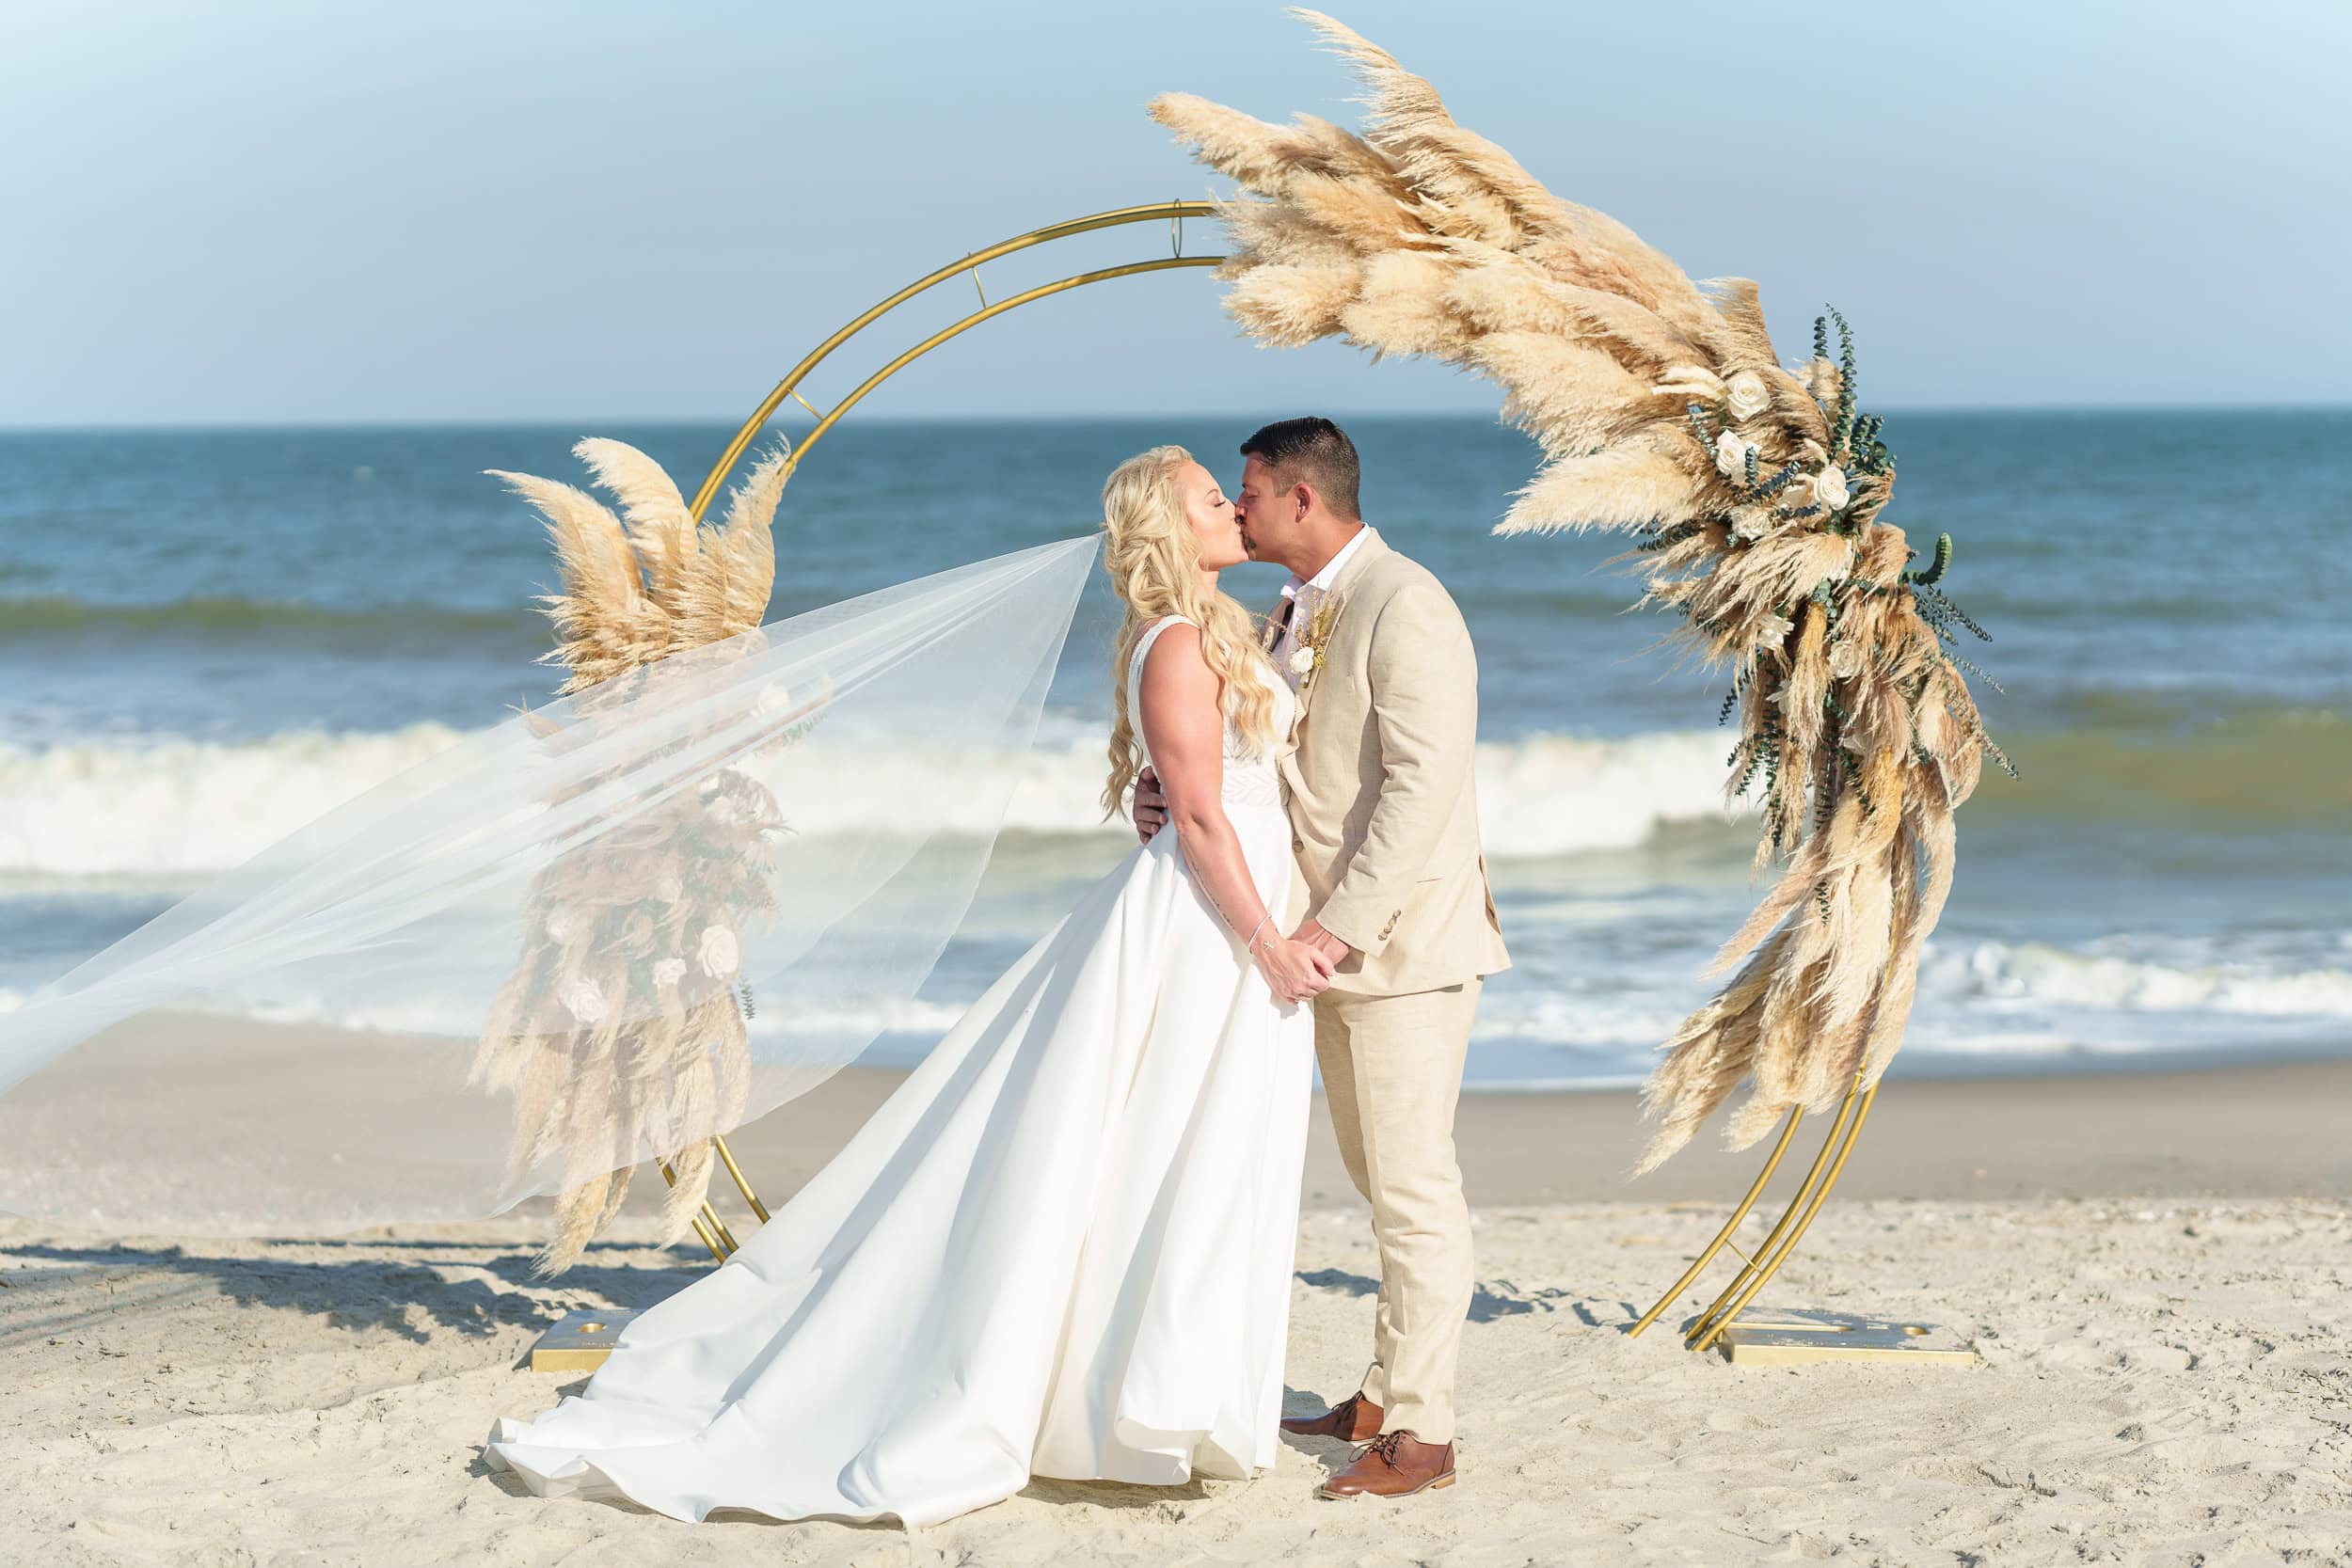 Veil blowing in the wind under the wedding arch in strong direct sun - Beach House in Pawleys Island